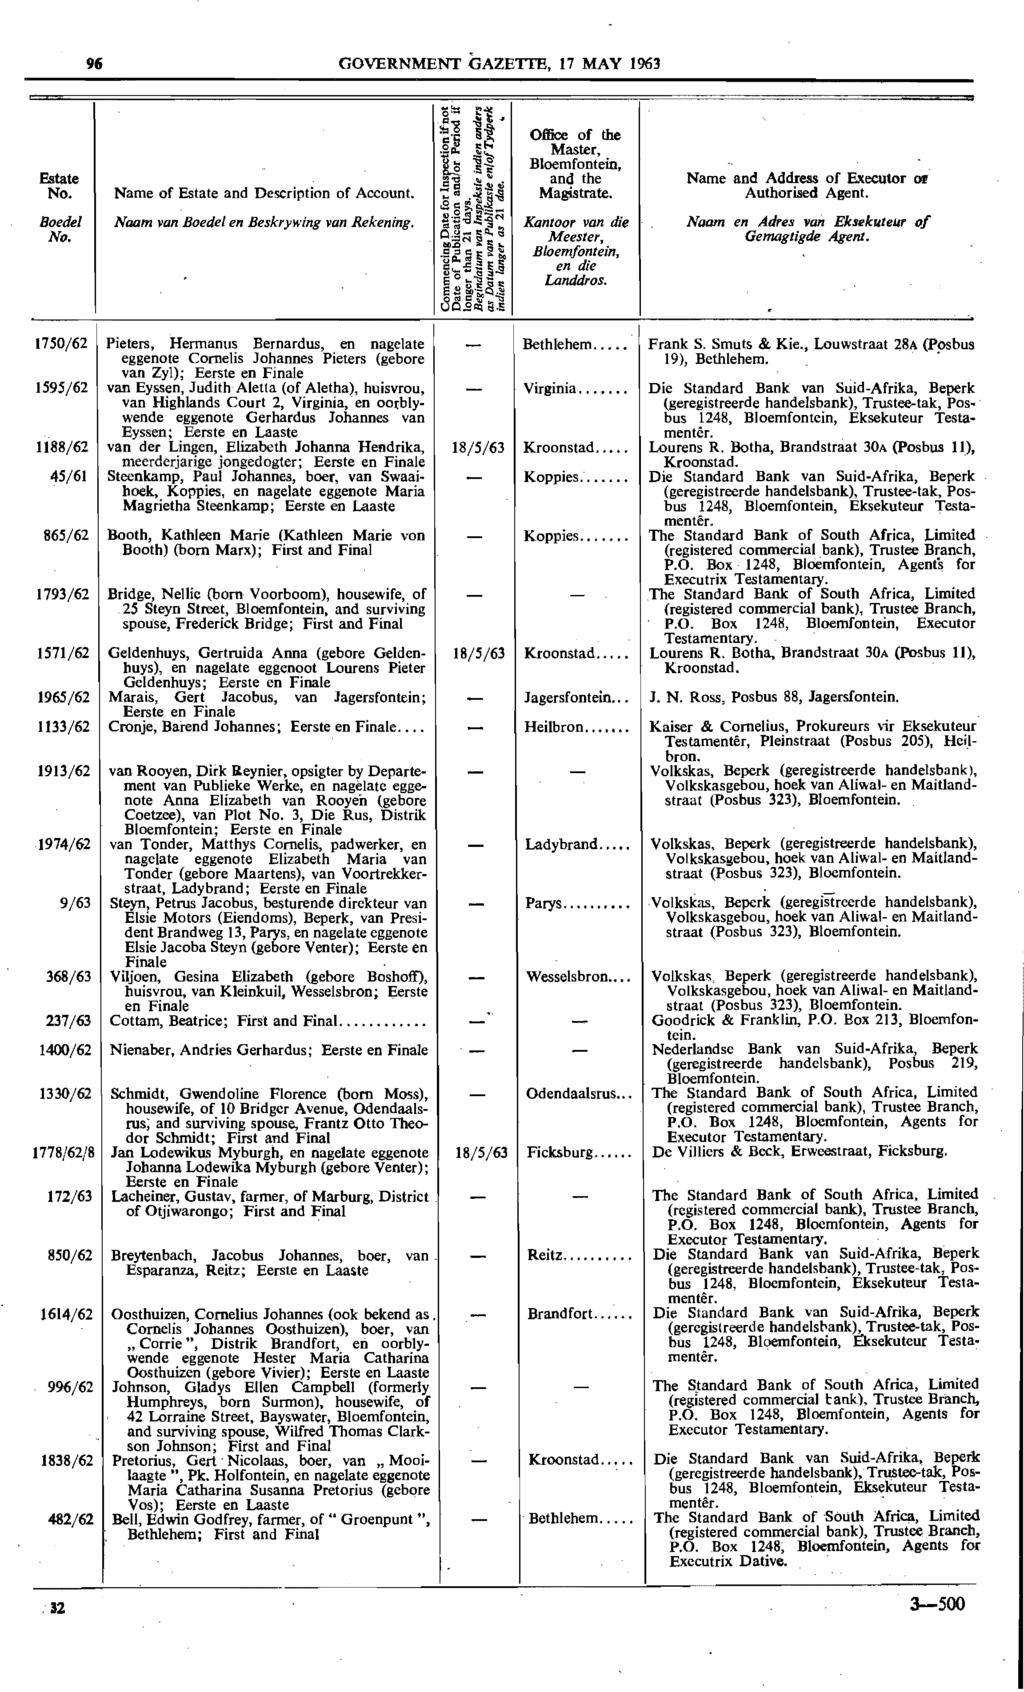 '6 GOVERNMENT GAZETIE, 17 MAY 1963 Estate No. Name of Estate and Description of Account. Office of the Master, Bloemfontein, and the Magistrate. Name and Address of Executor Of Authorised Agent.